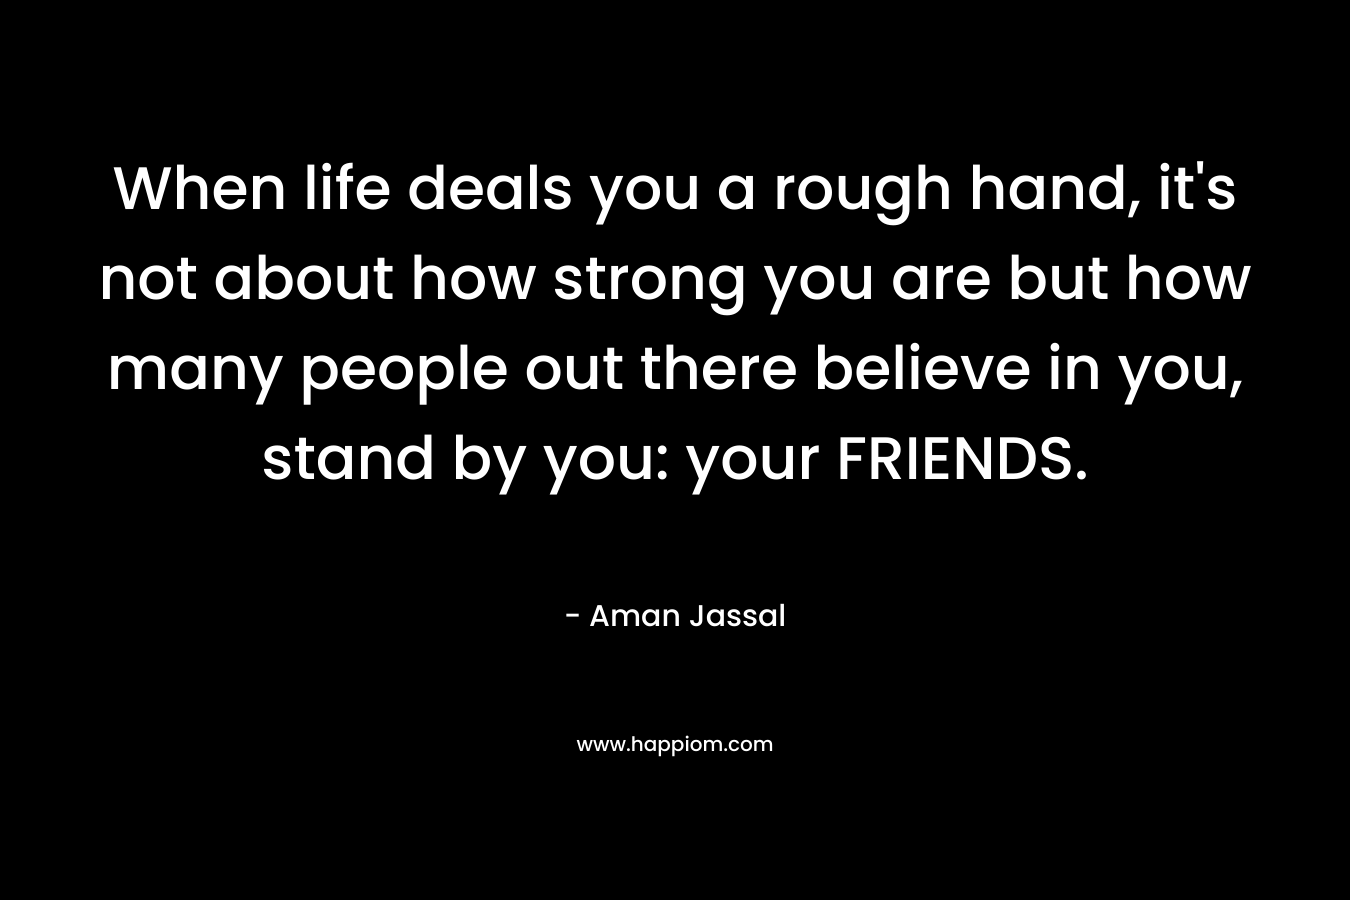 When life deals you a rough hand, it's not about how strong you are but how many people out there believe in you, stand by you: your FRIENDS.